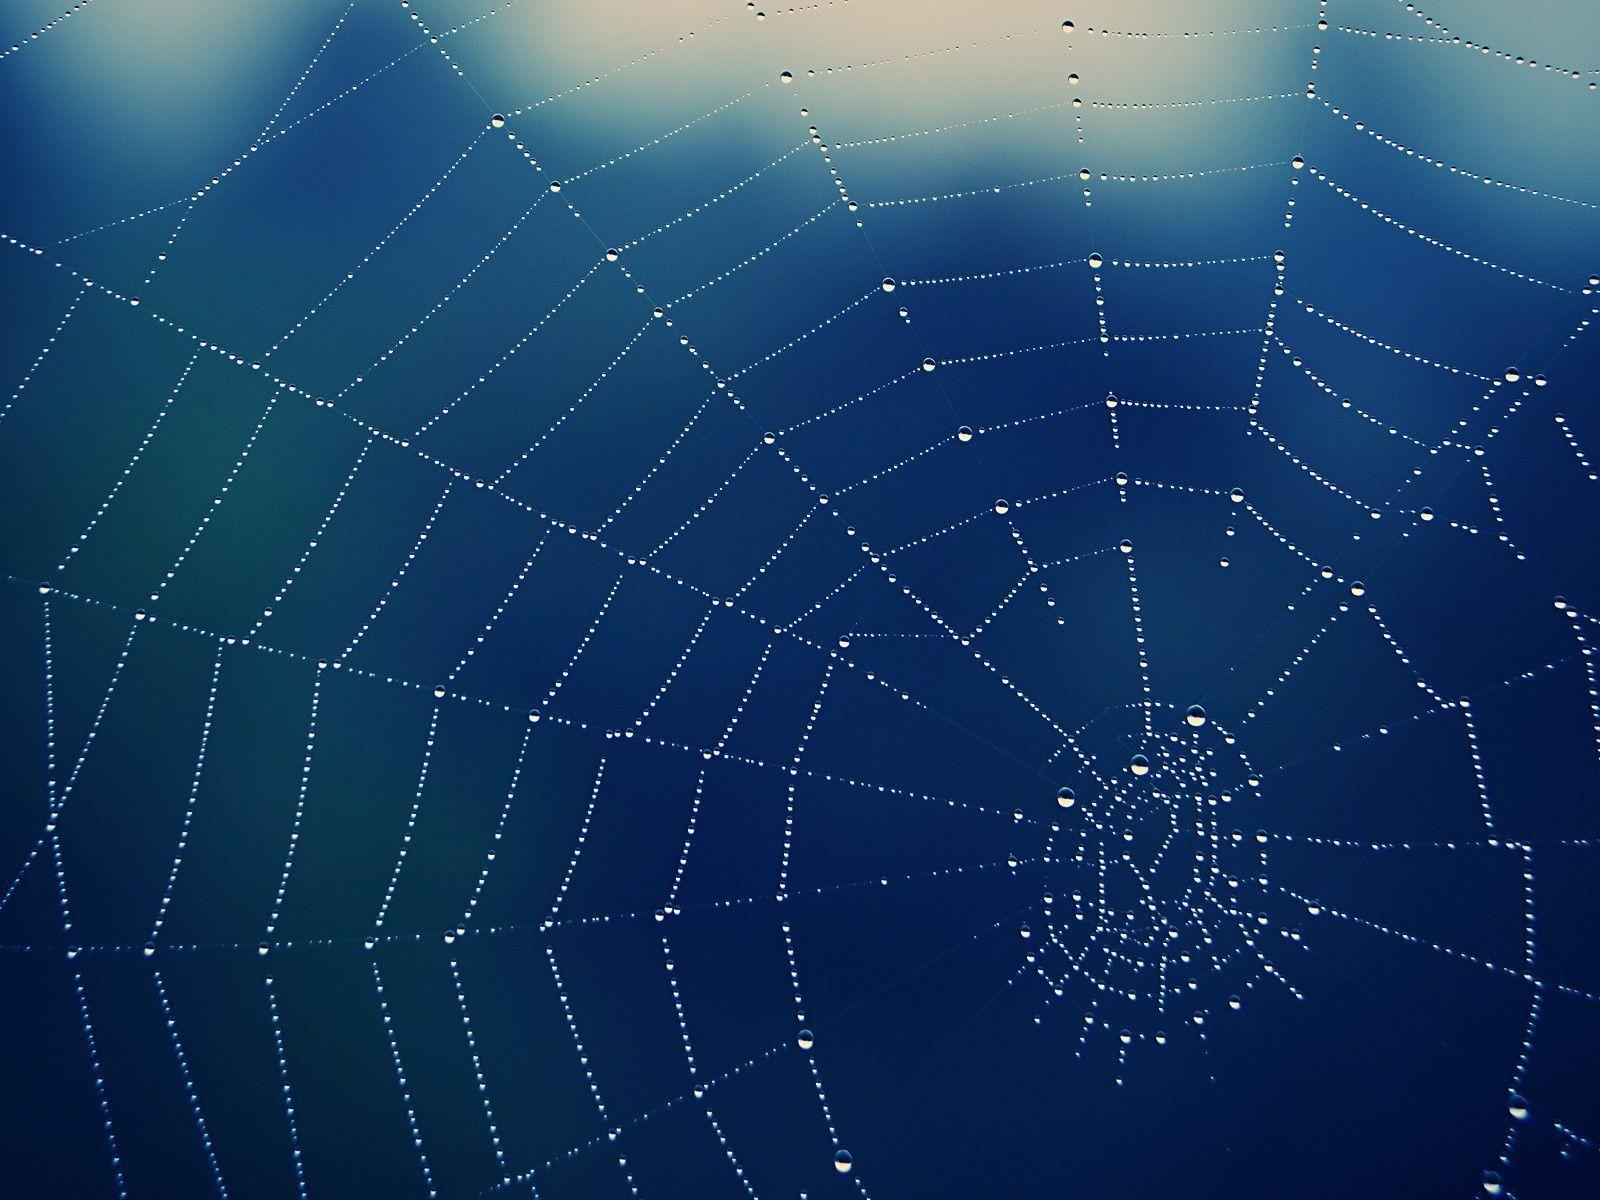 Free Image Background, Spider Web, Water Drop